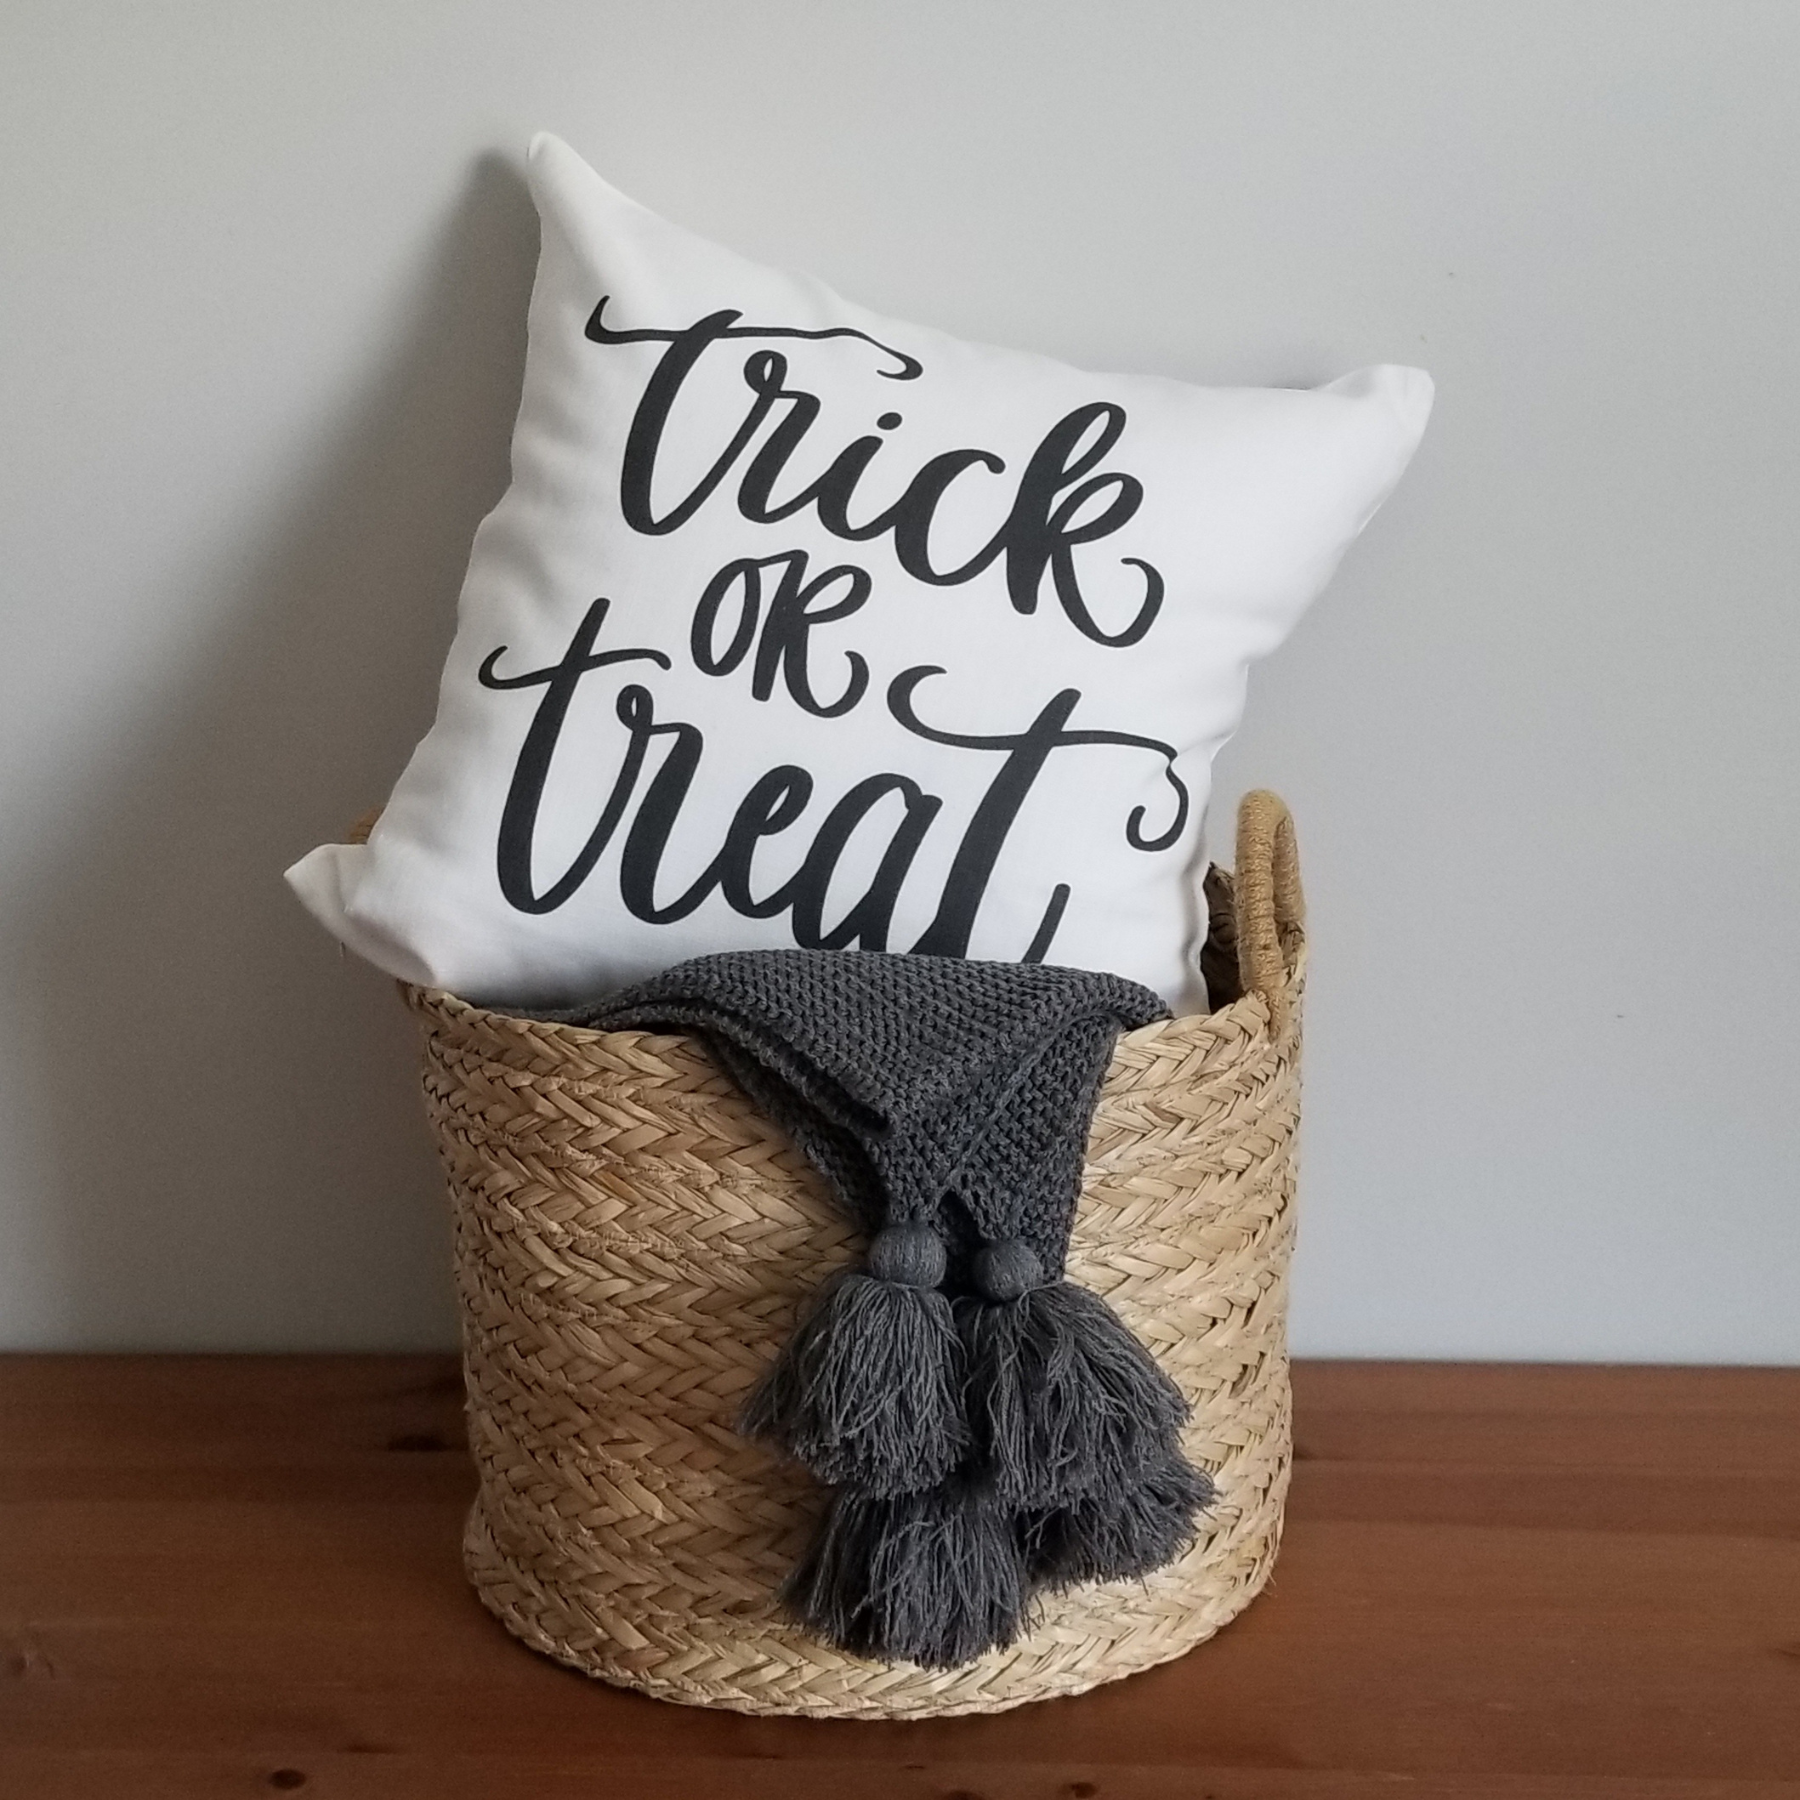 Trick or Treat Pillow Cover